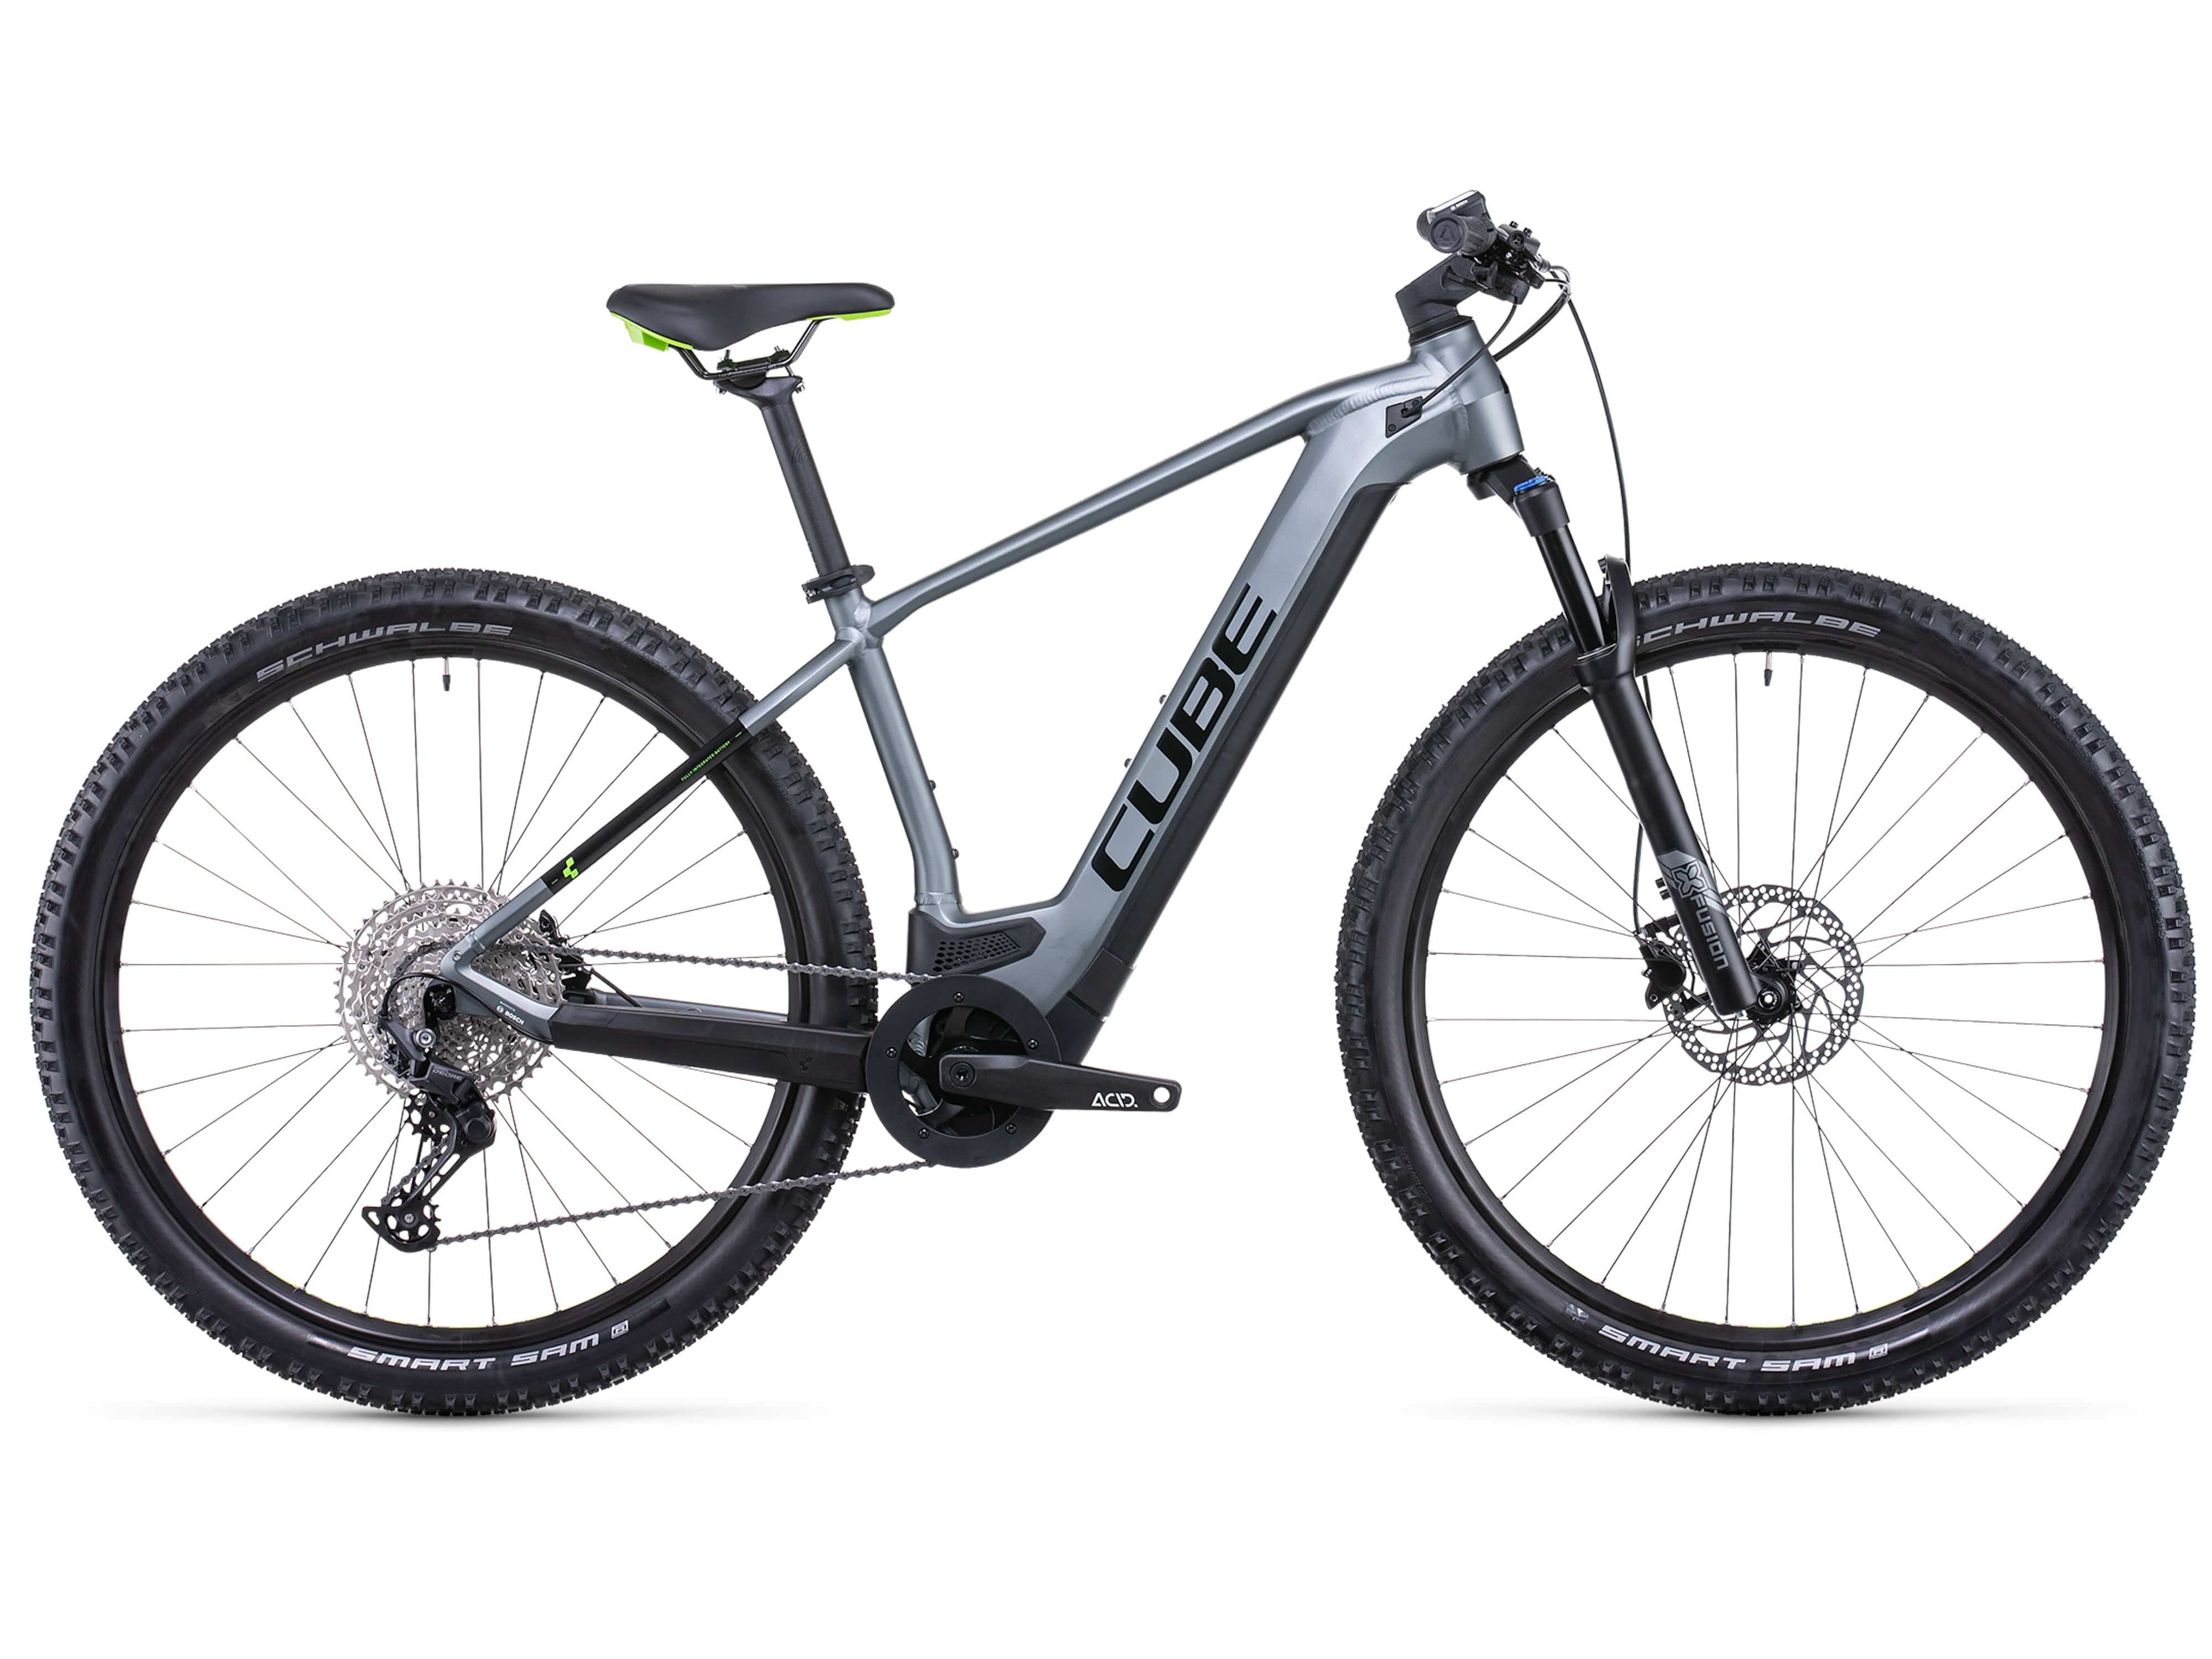 Cube Reaction Hybrid Pro 500 hardtail eMTB in Flashgrey n' green side view on Fly Rides